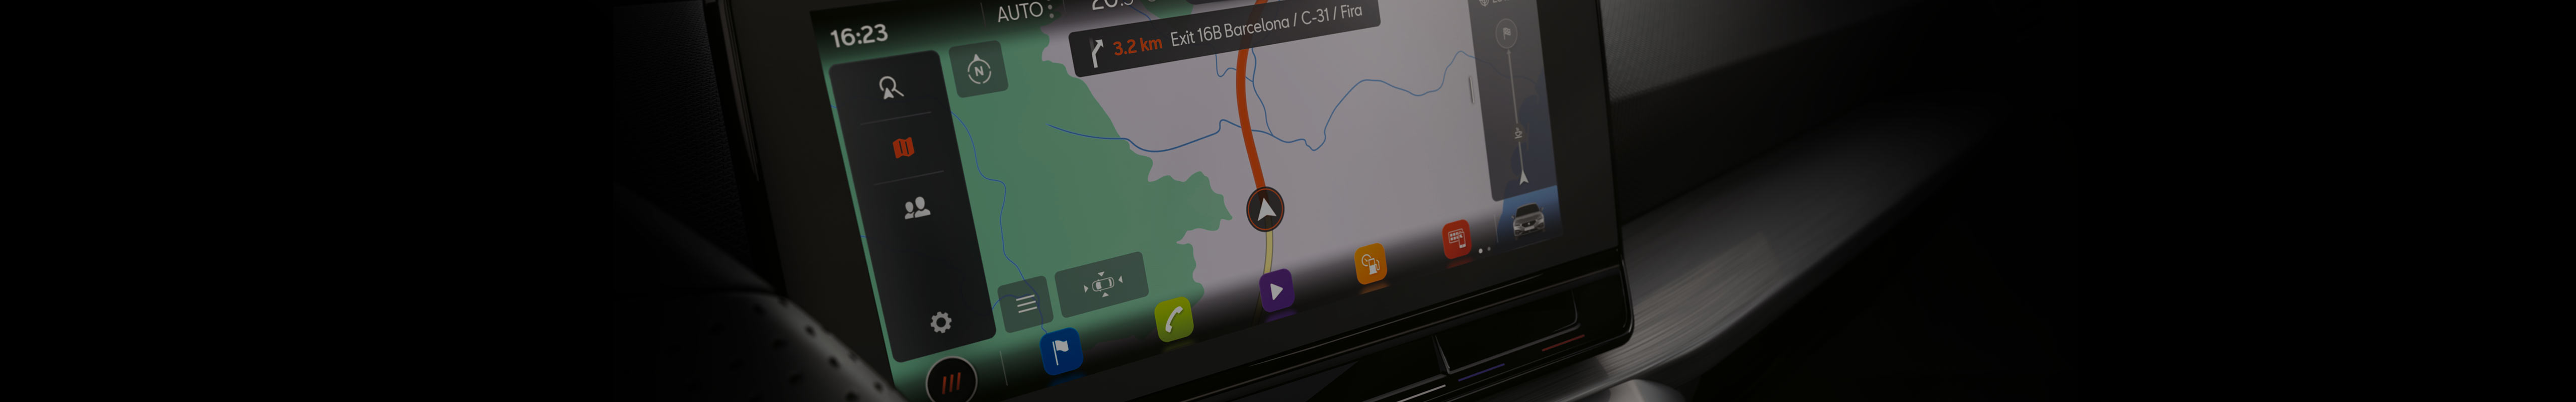 SEAT Navi System car map updates – generic map view dashboard orange outline